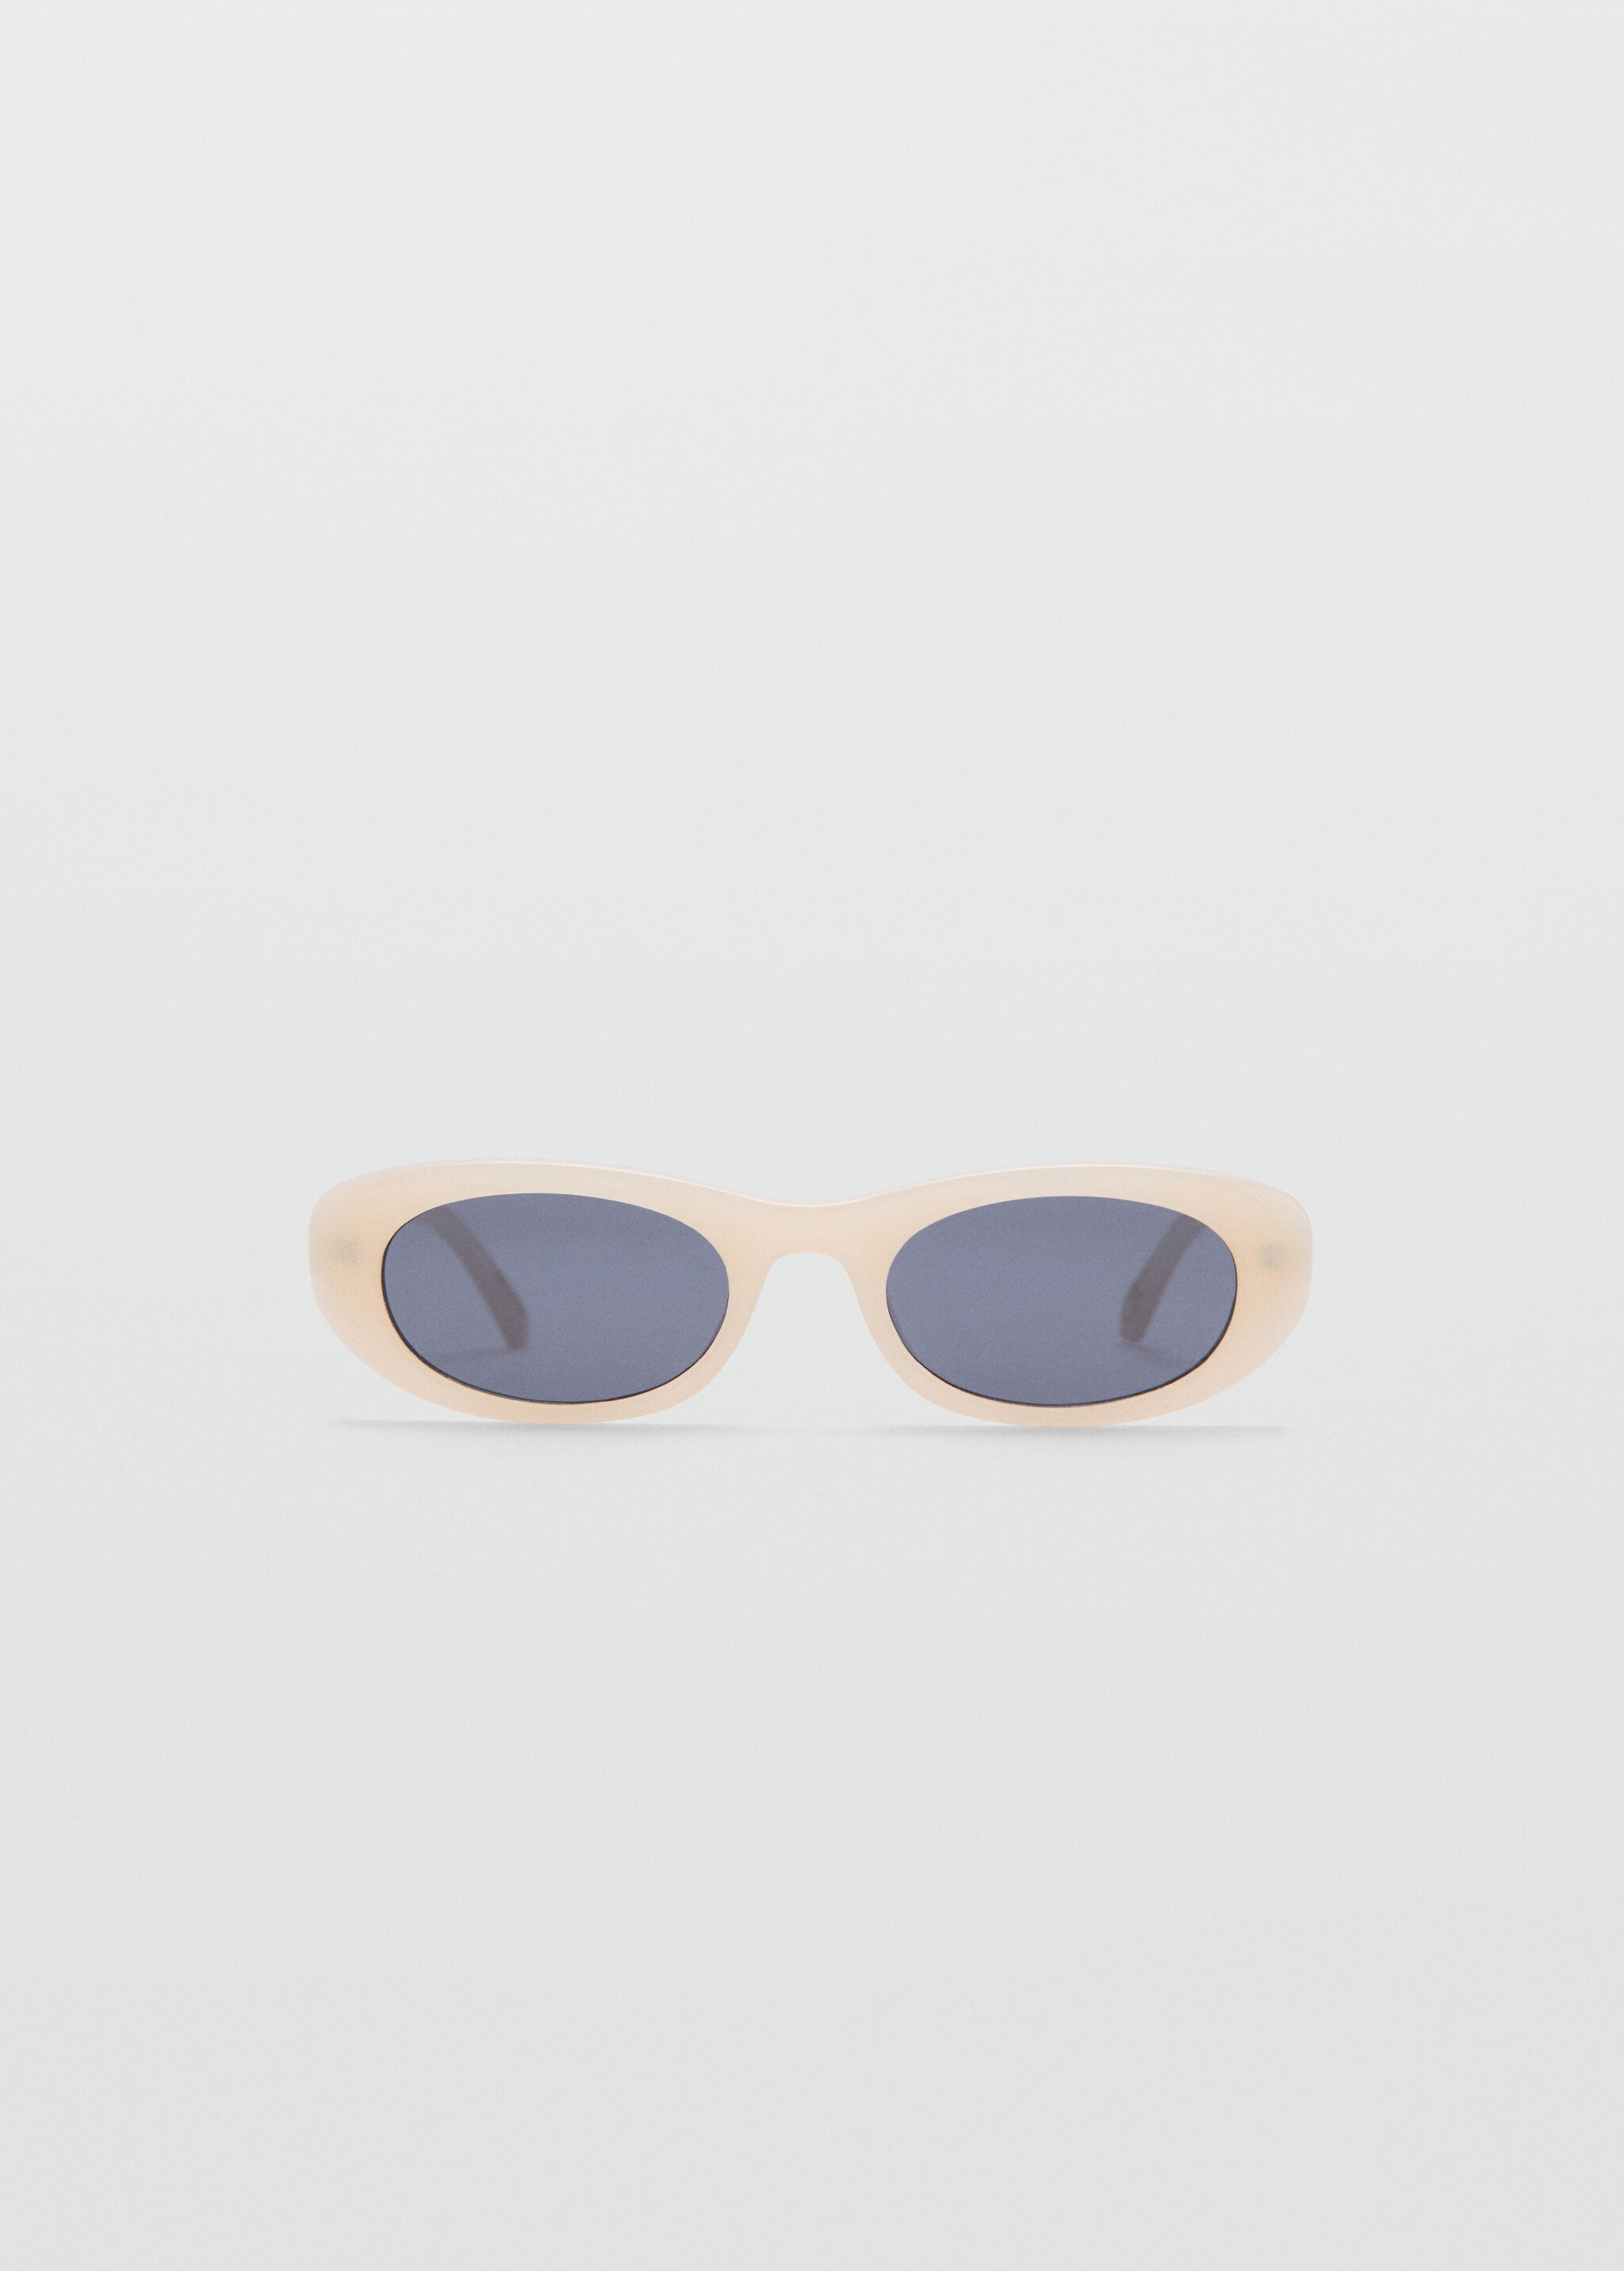 Oval sunglasses - Article without model